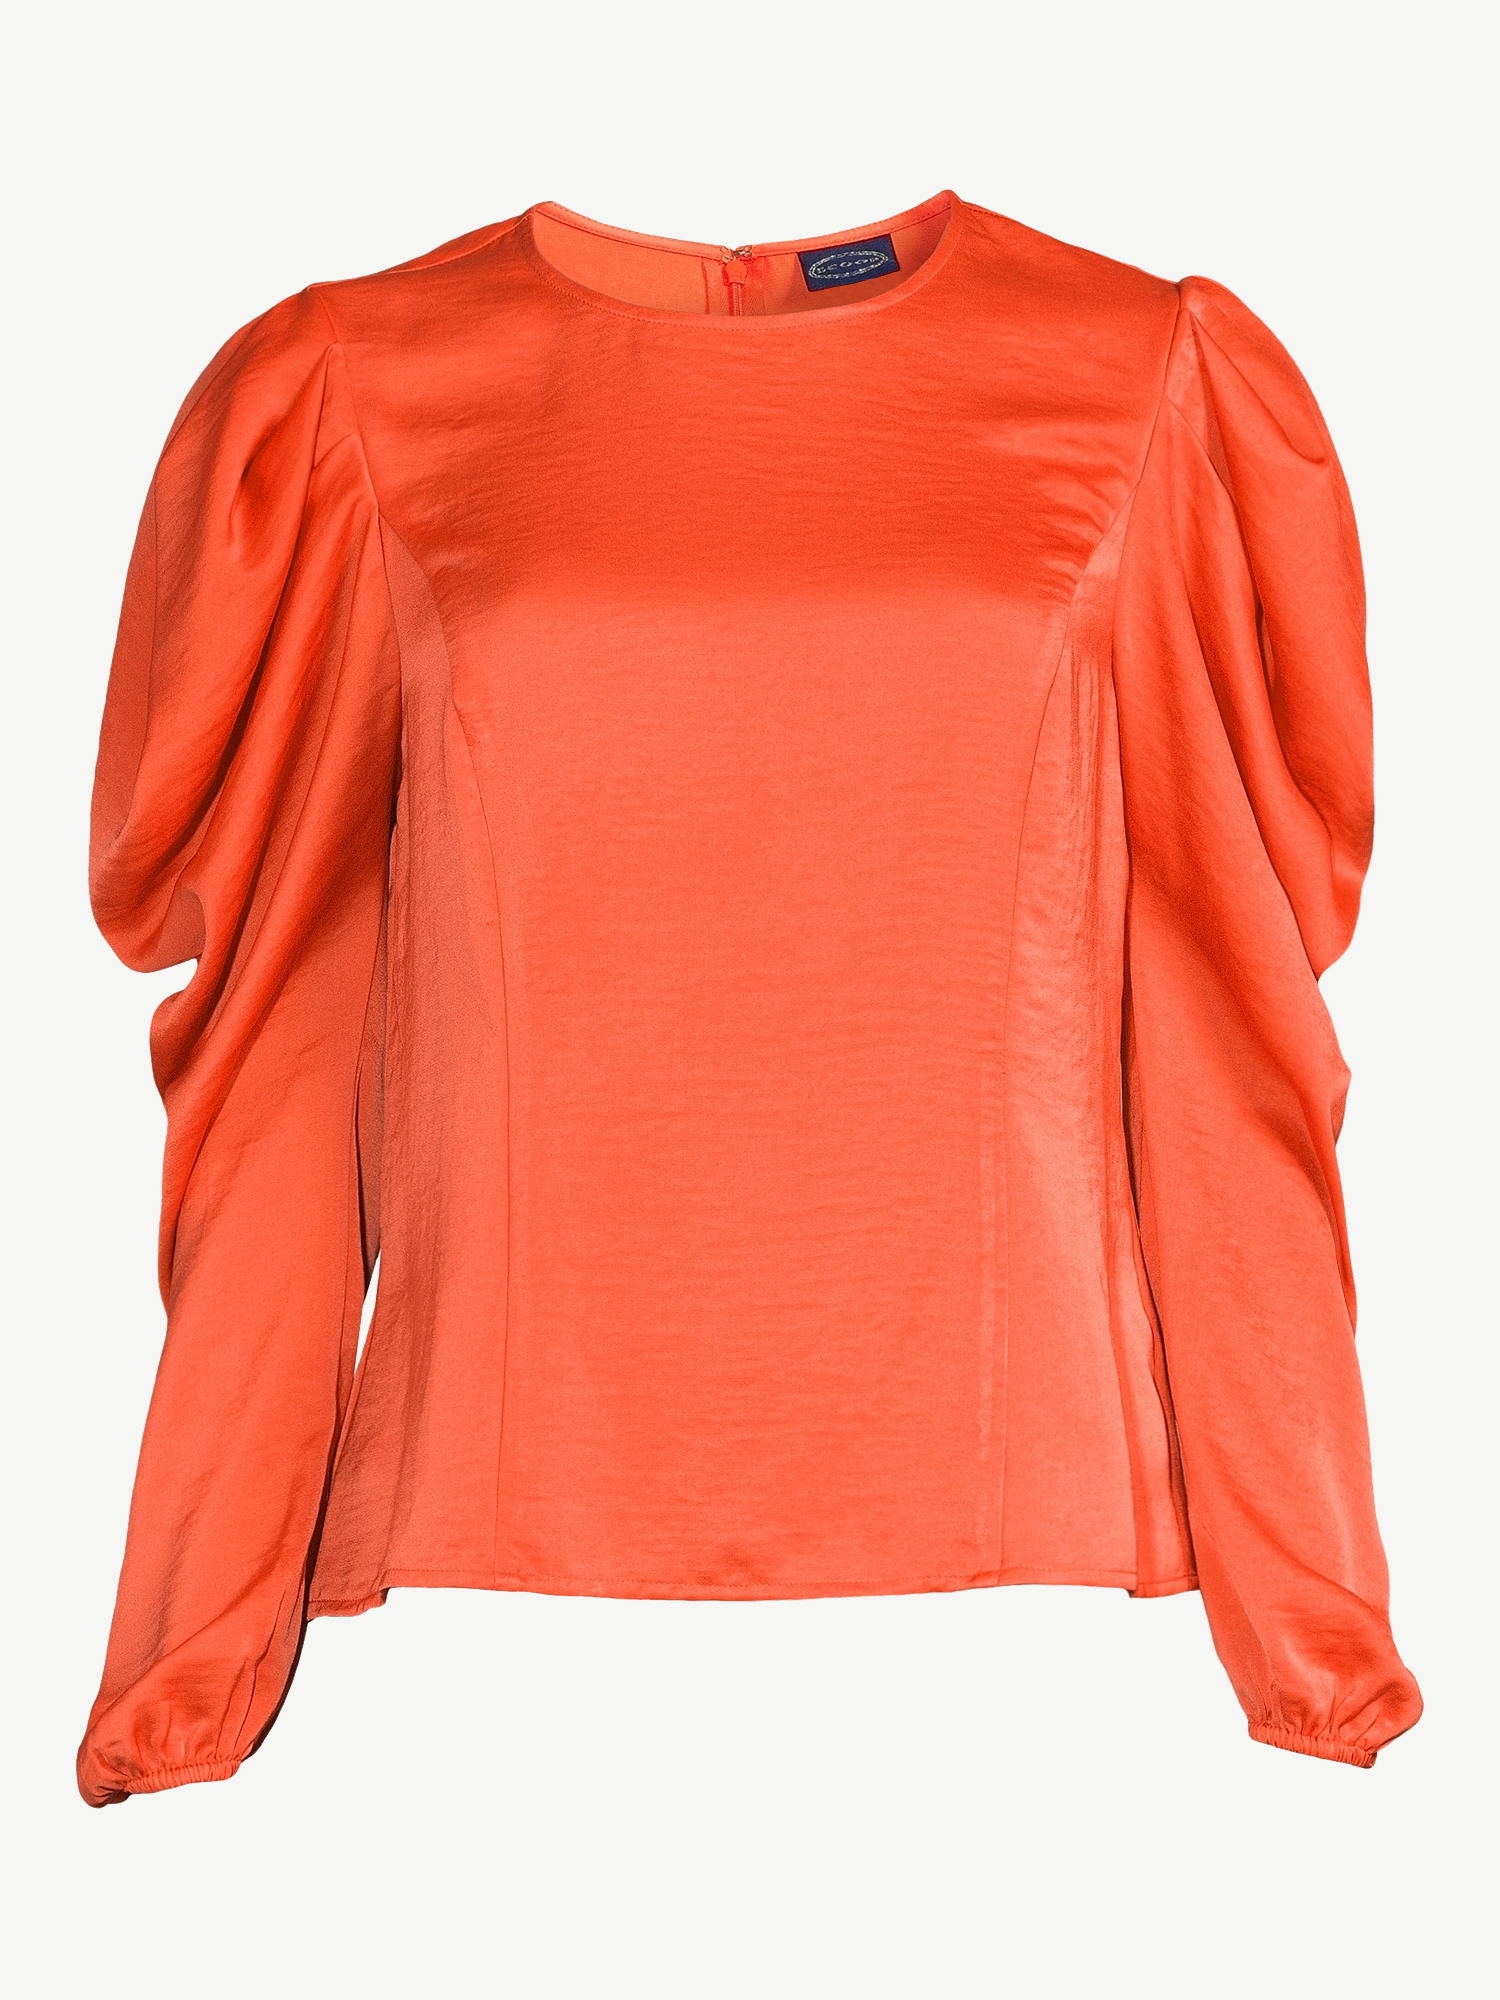 Scoop Women's Top with Blouson Sleeves, Sizes XS-XXL - image 5 of 5